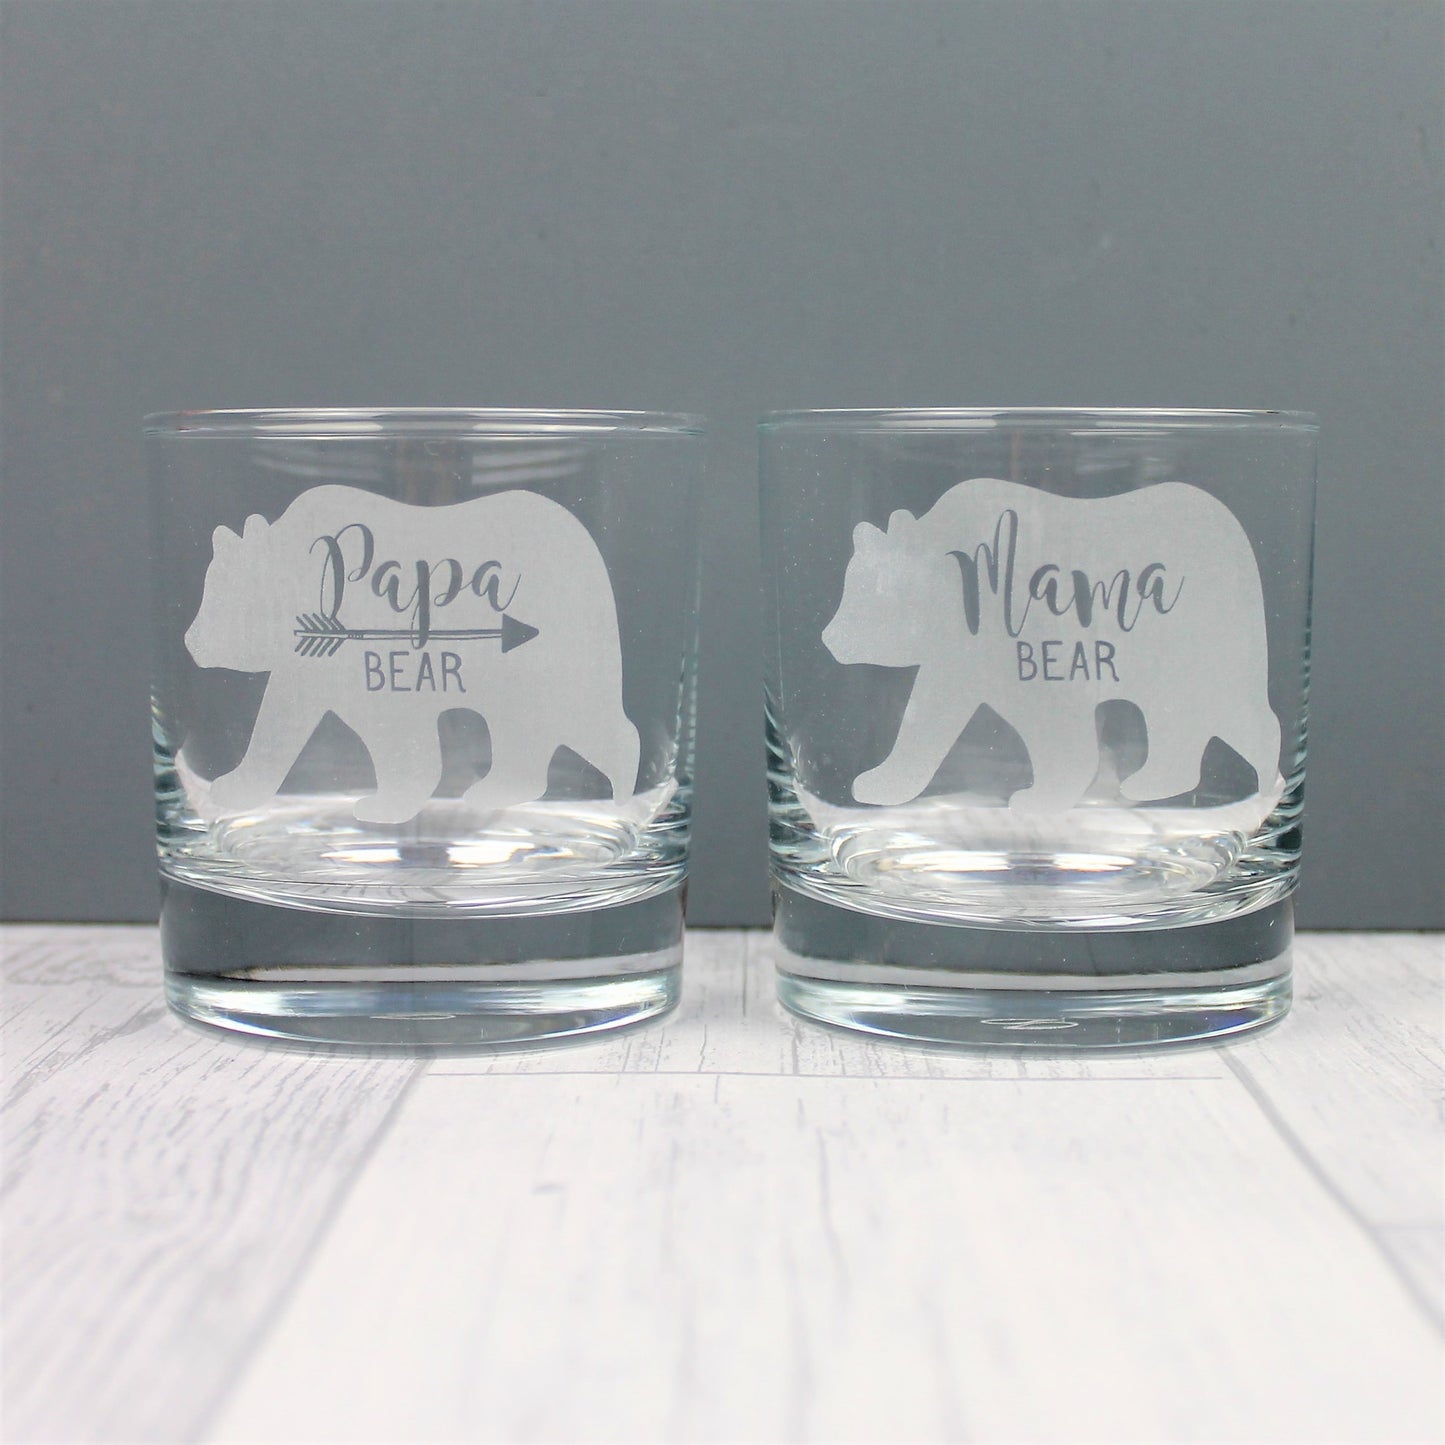 engraved whisky glass duo with mama and papa bear engraved onto them 